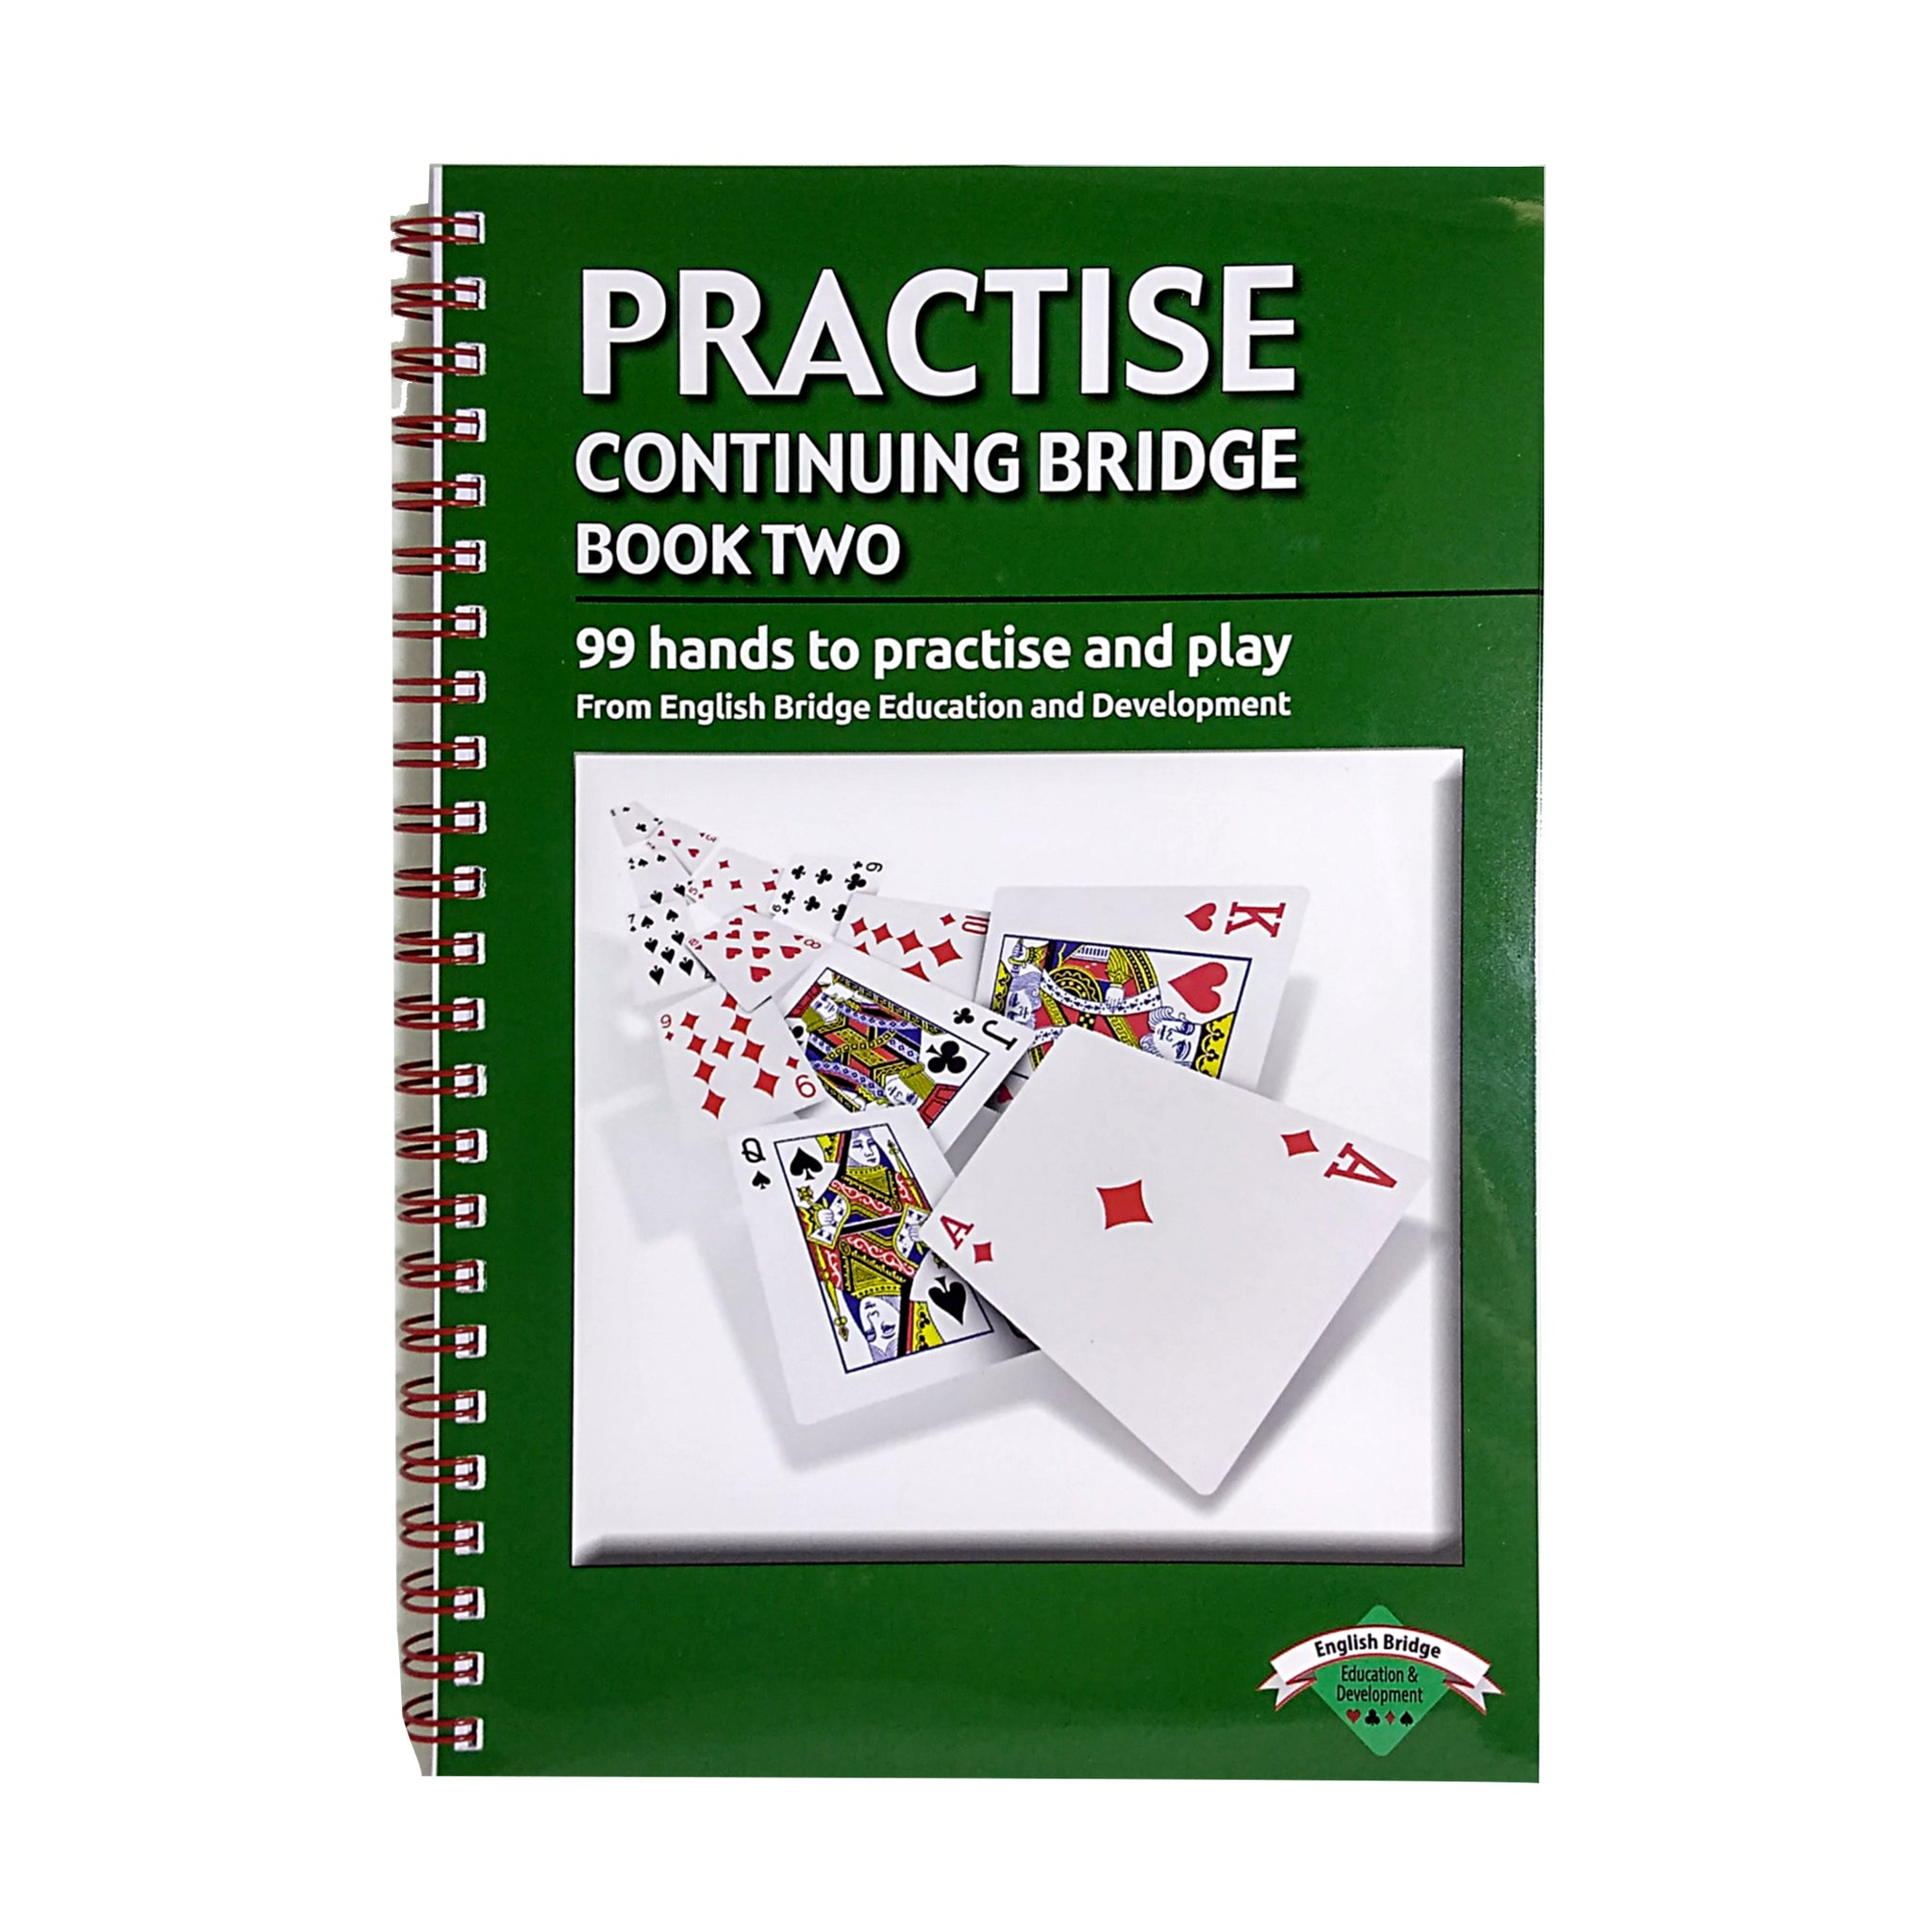 Practise - Continuing Bridge (A5 size) - OFFER